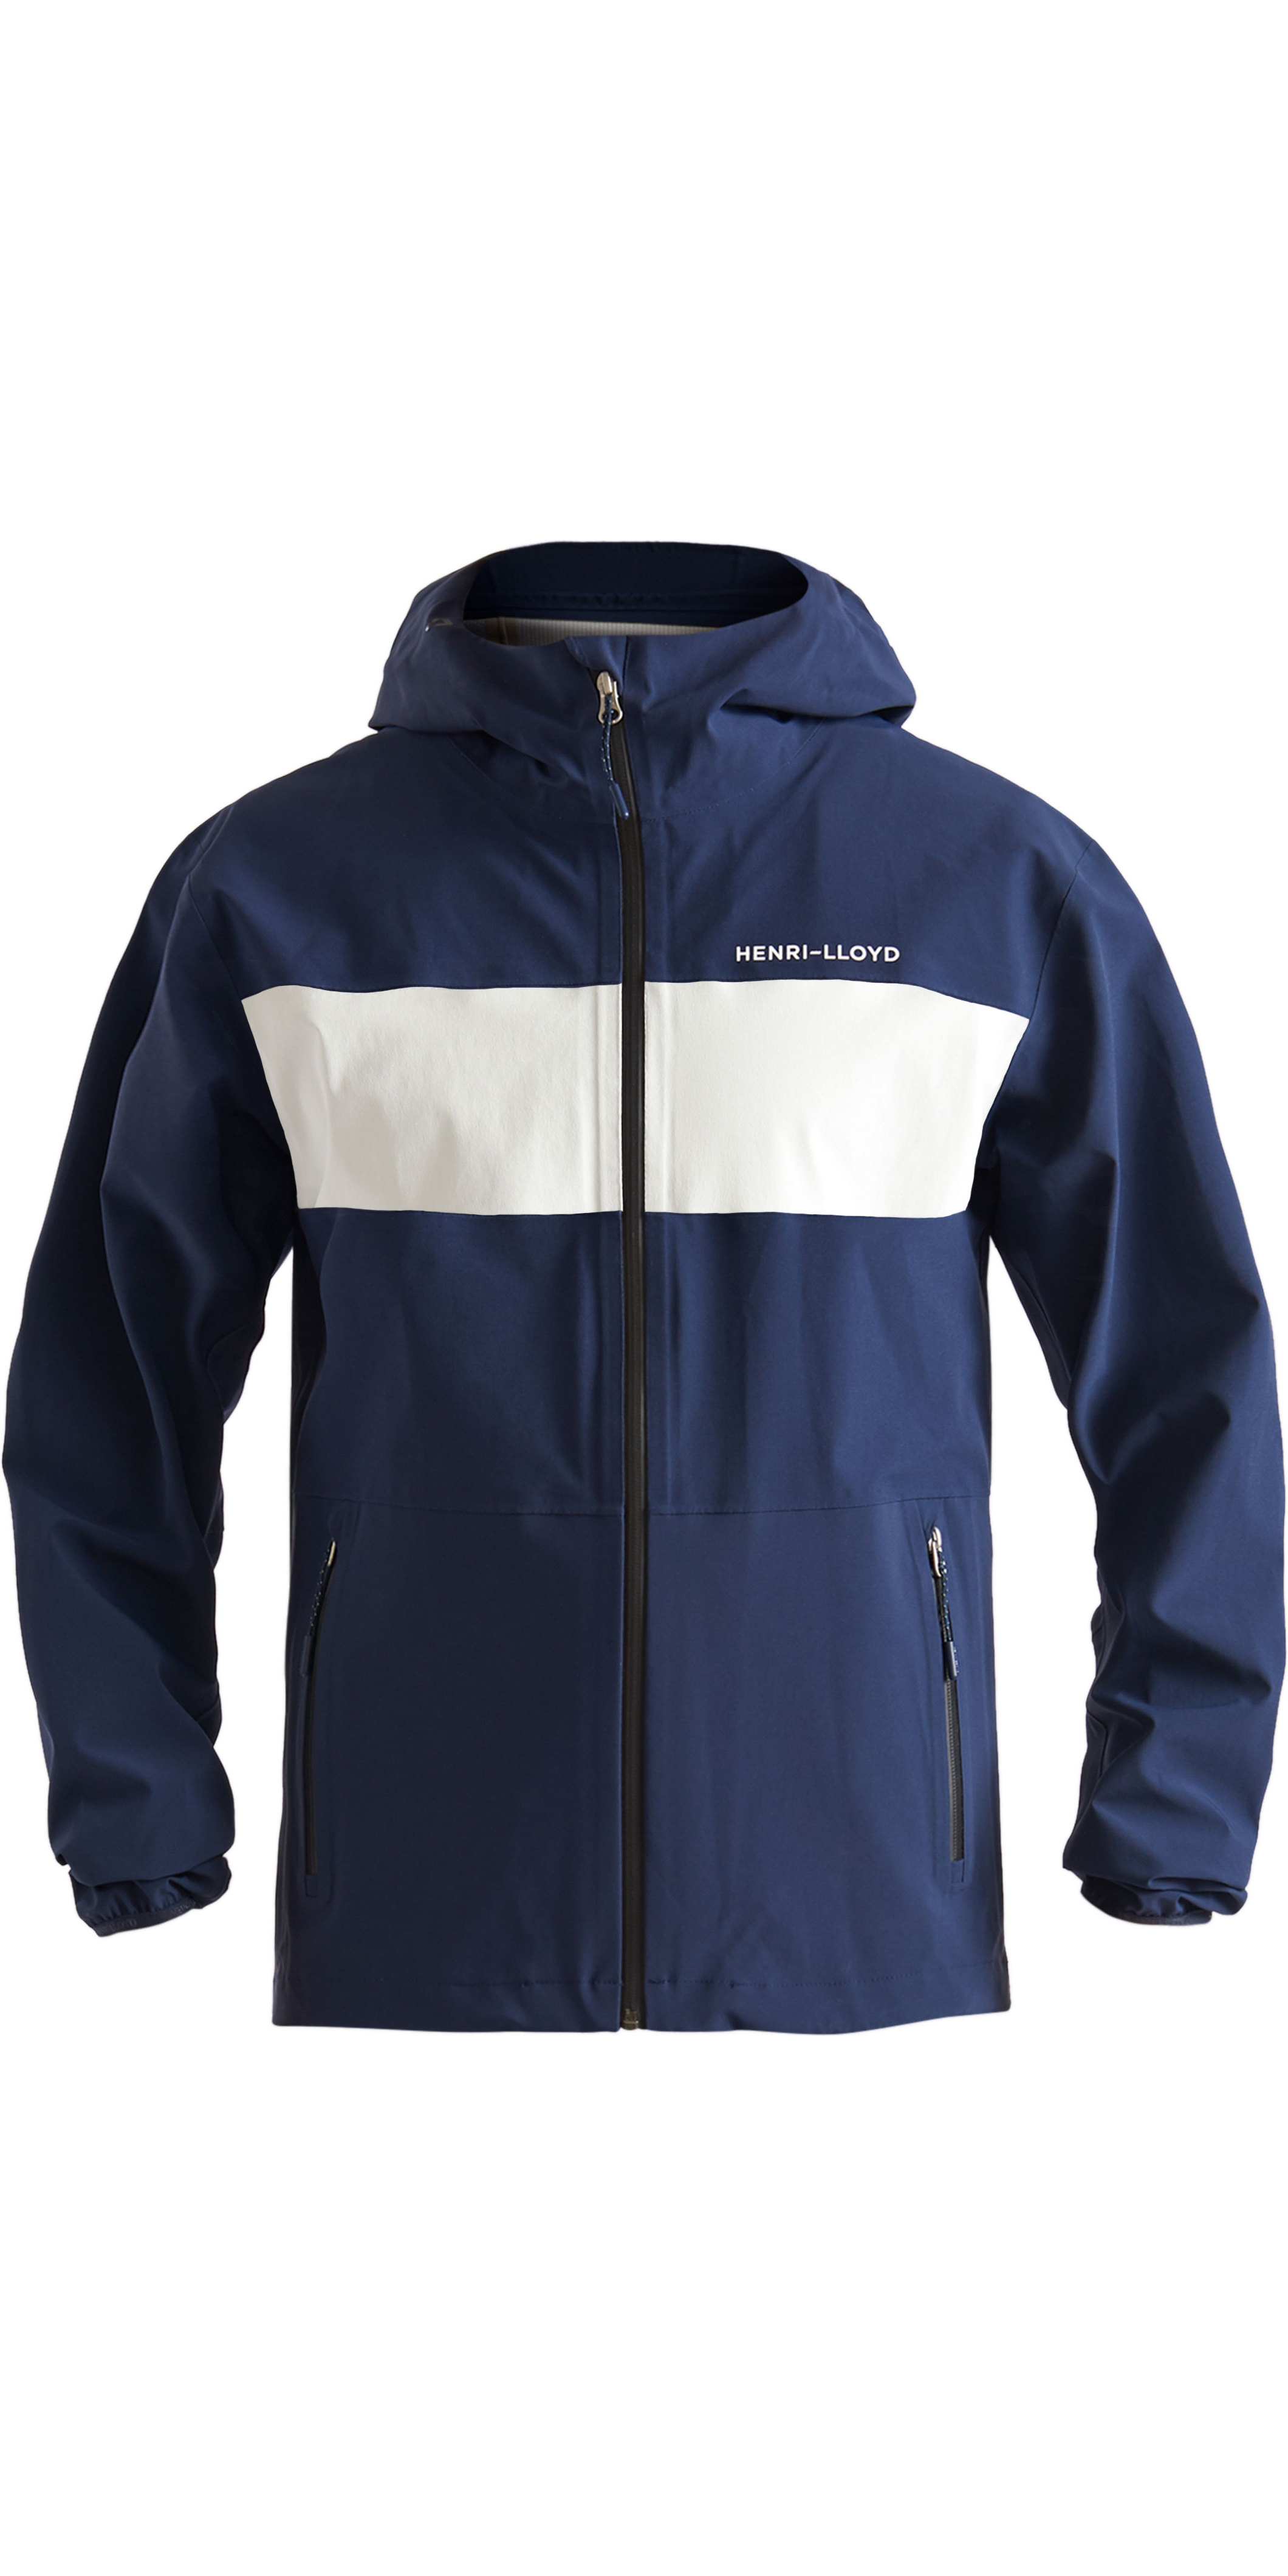 2020 Henri Lloyd Mens M-Course Light 2 5 Layer Inshore Sailing Jacket  P201110042 | Watersports Outlet